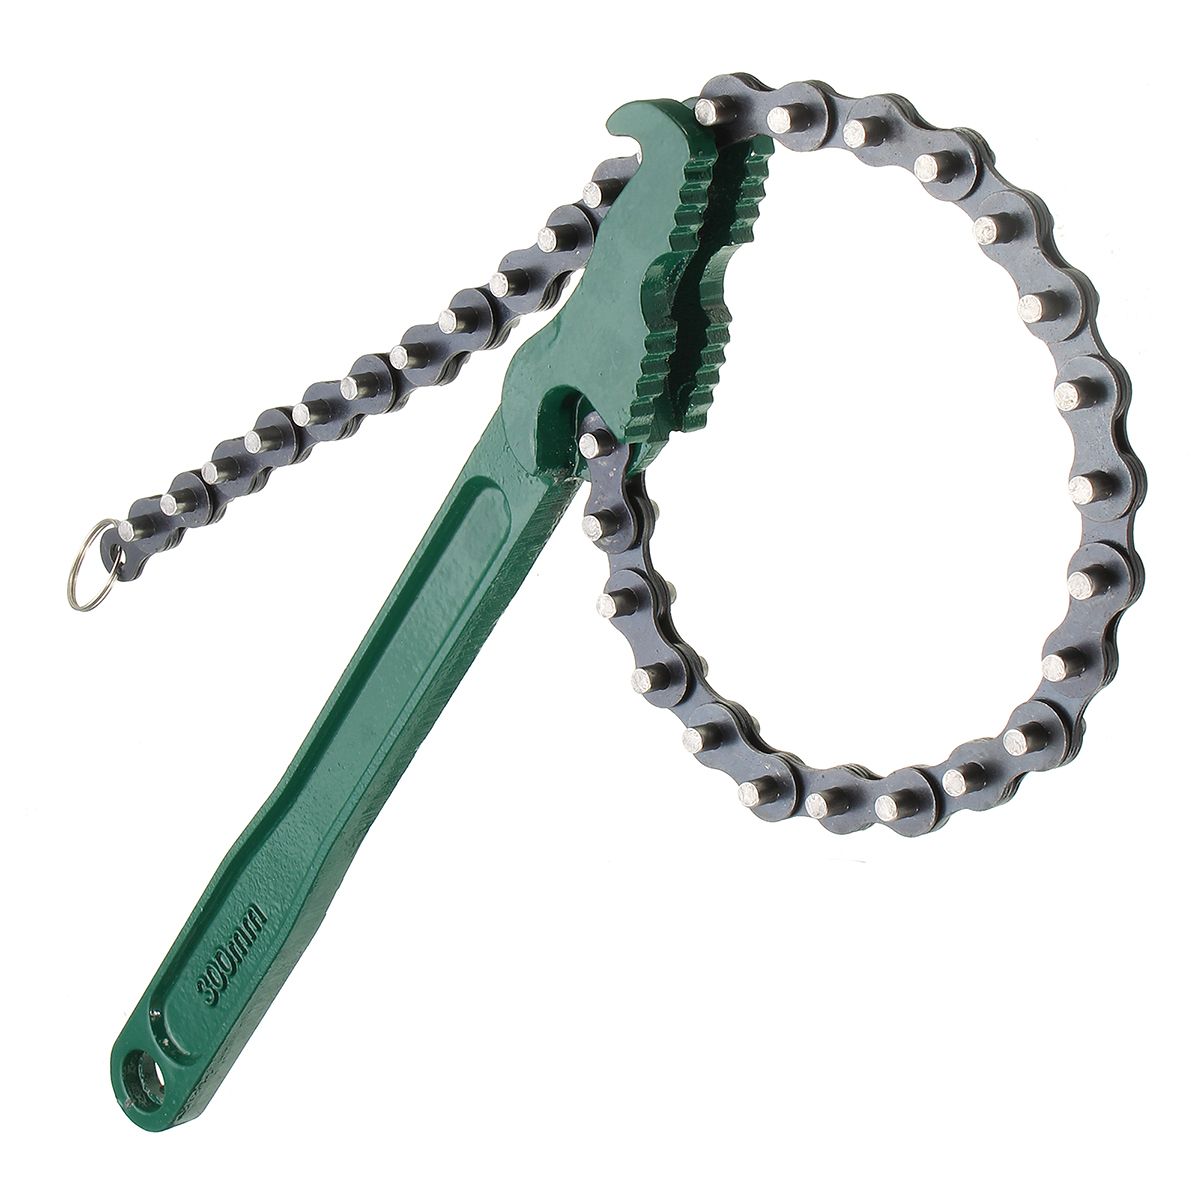 812-Inch-Chain-Type-Machine-DIY-Series-Oil-Grid-Filter-Wrench-Plier-Remove-Tool-1142781